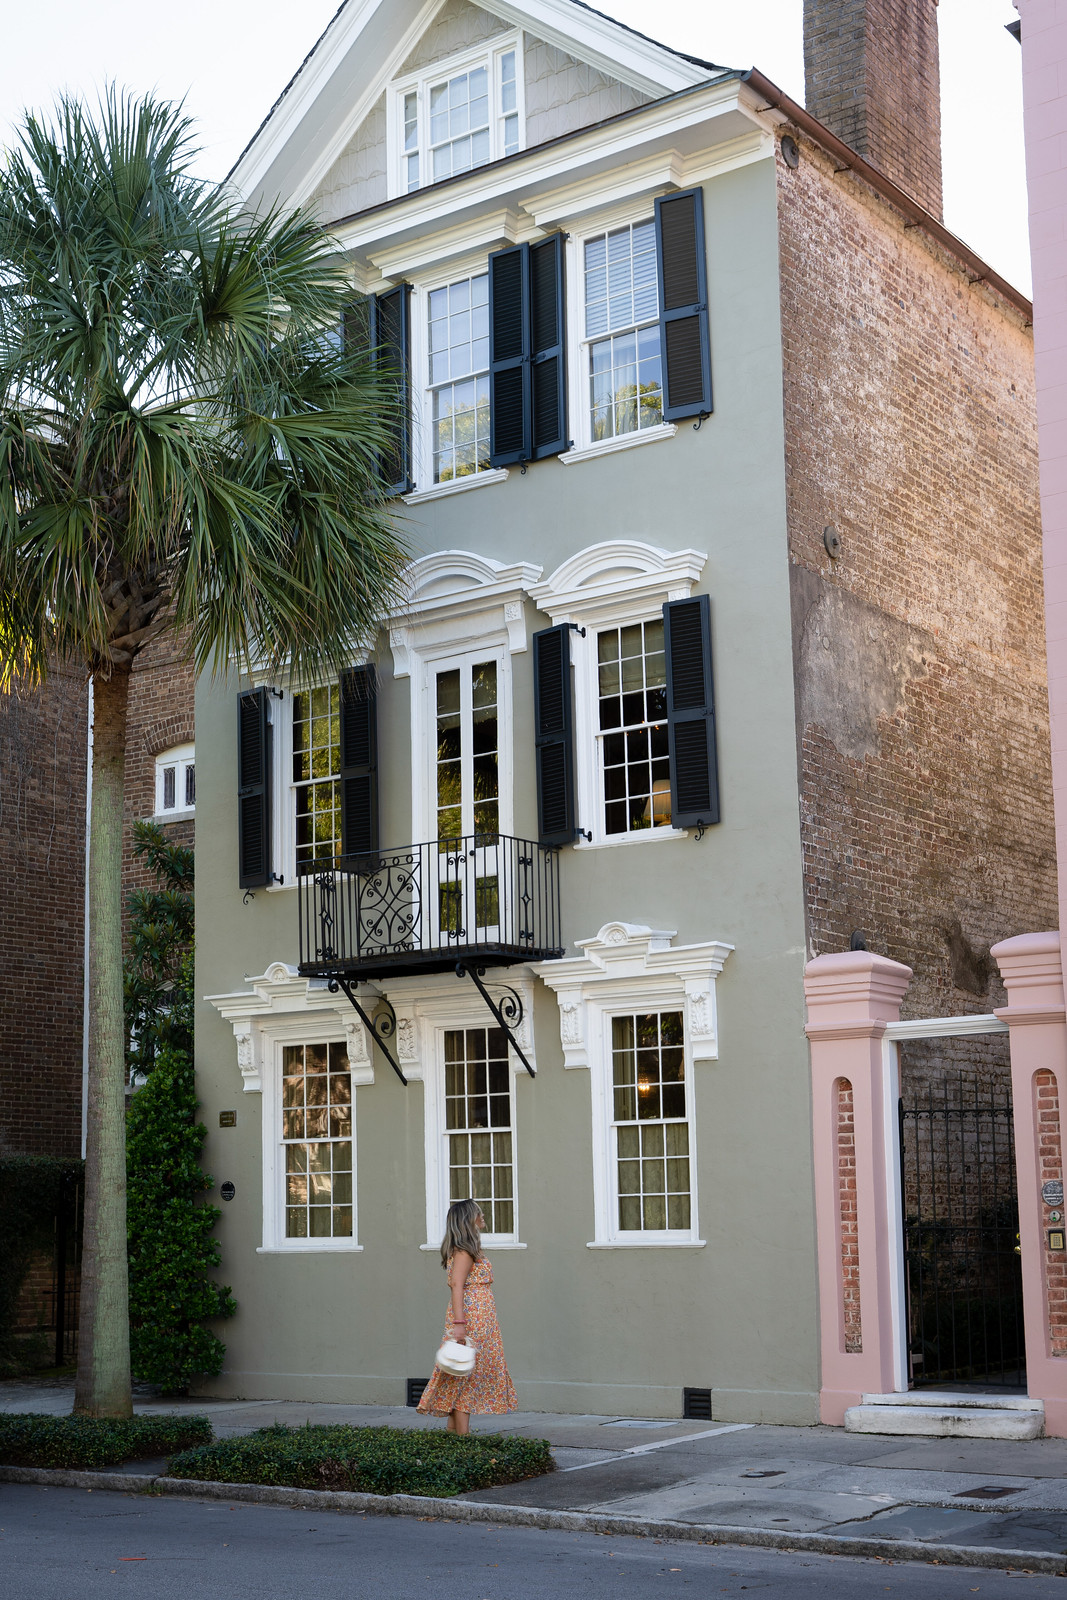 10 Things You Must Do in Charleston | Colorful Houses on Meeting St | What to Do in Charleston South Carolina | Charleston Travel Guide | Top Things to do in Charleston | Best Things to Do in Charleston SC | What to See, Do & Eat in Charleston